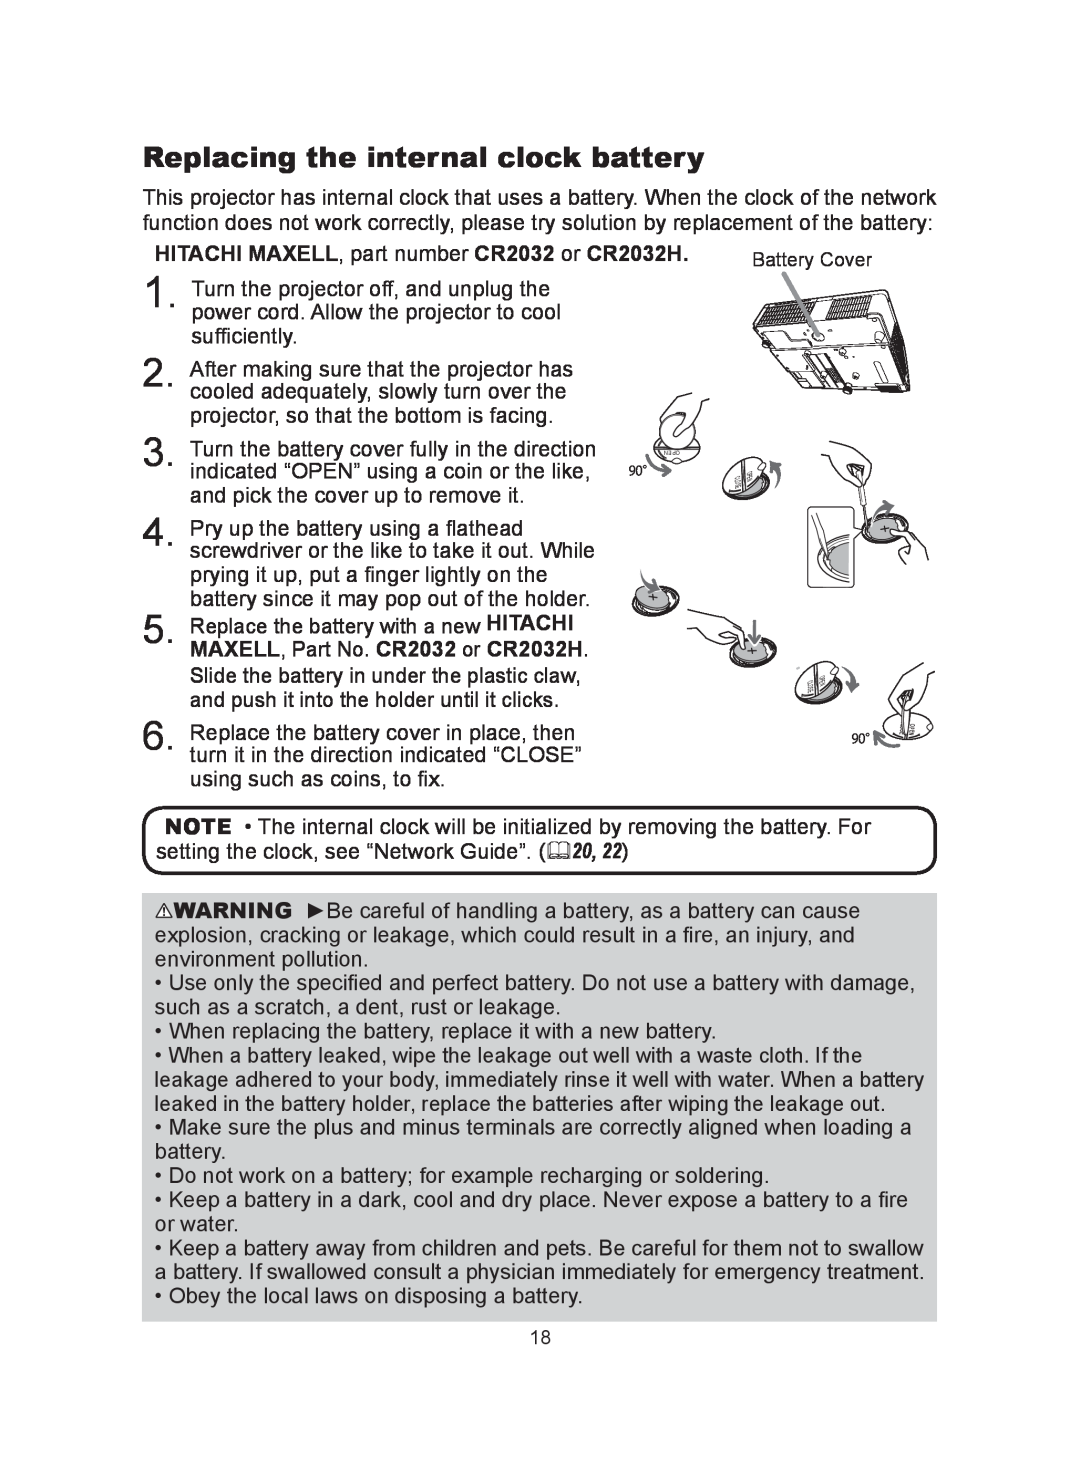 Hitachi CP-A300N user manual Replacing the internal clock battery, HITACHI MAXELL, part number CR2032 or CR2032H 